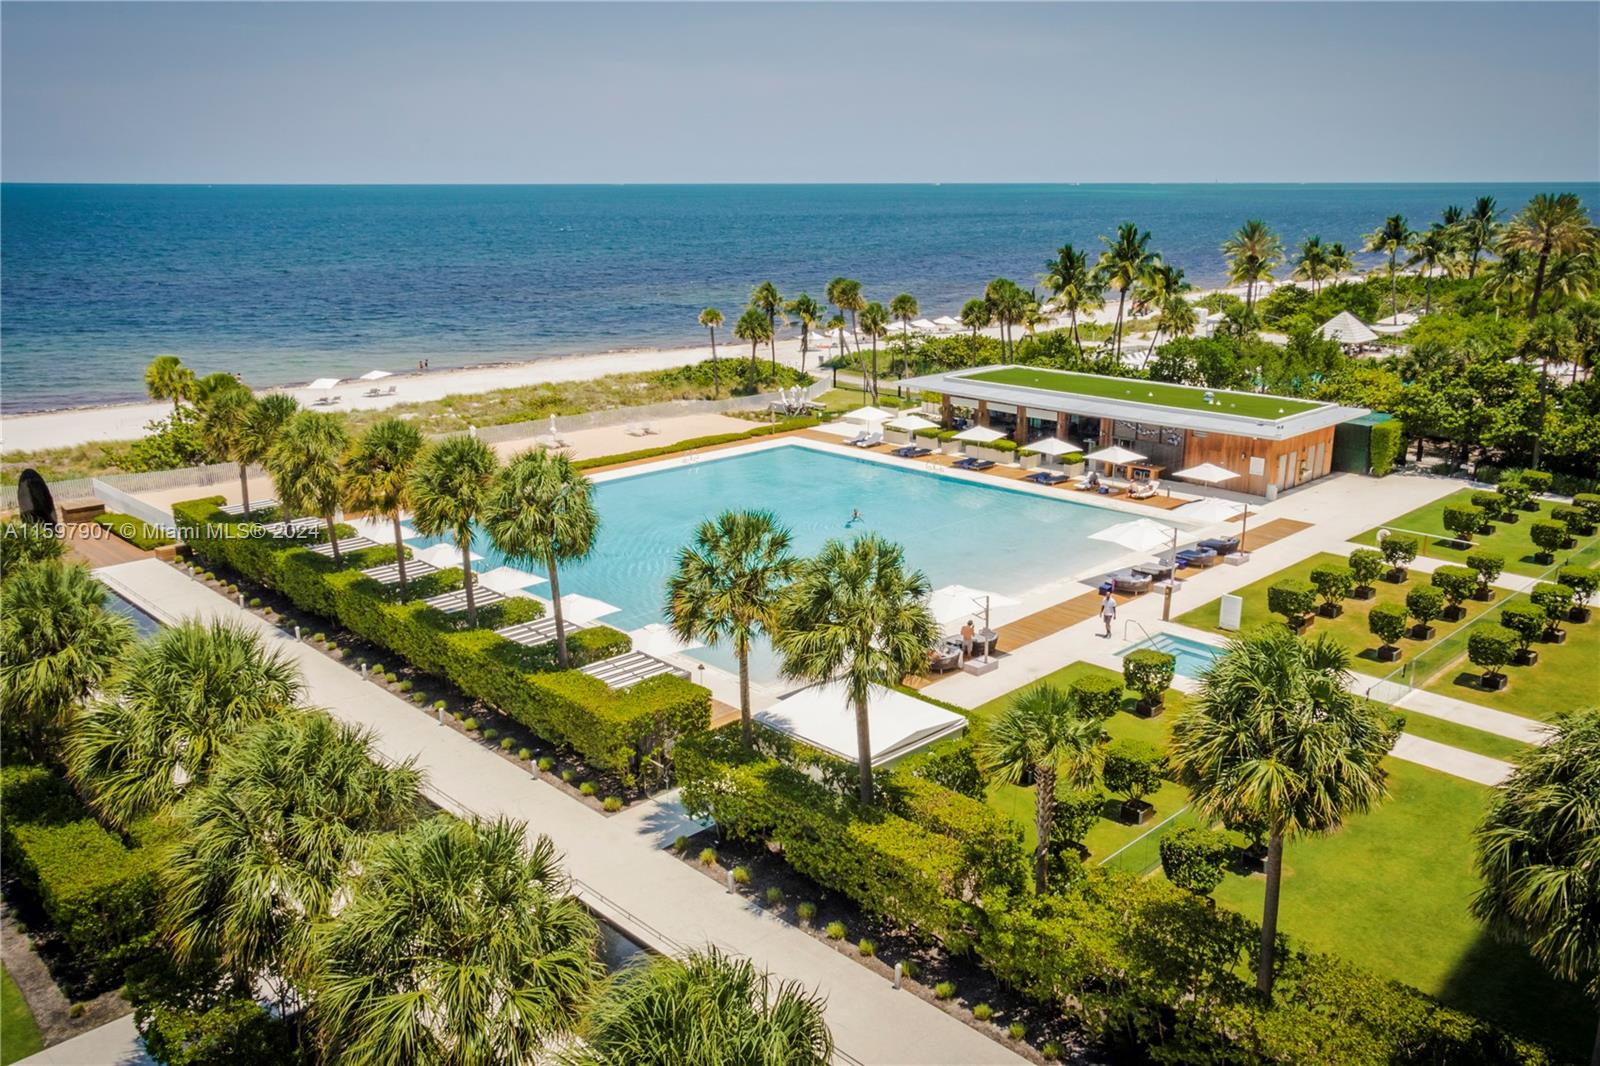 Enjoy an unobstructed ocean view from a chic 2 Bedroom+ den, 2.5 bathrooms unit at the prestigious Oceana Key Biscayne. Den feature's modern design sliding door for privacy. Private elevator access to unit with floor ceiling windows throughout. Unit is tastefully furnished. Highly desired neighborhood features top-class amenities including 100x100 ft recreational pool, a lap pool, state of the art fitness center, putting green, pool beach, restaurant and more!